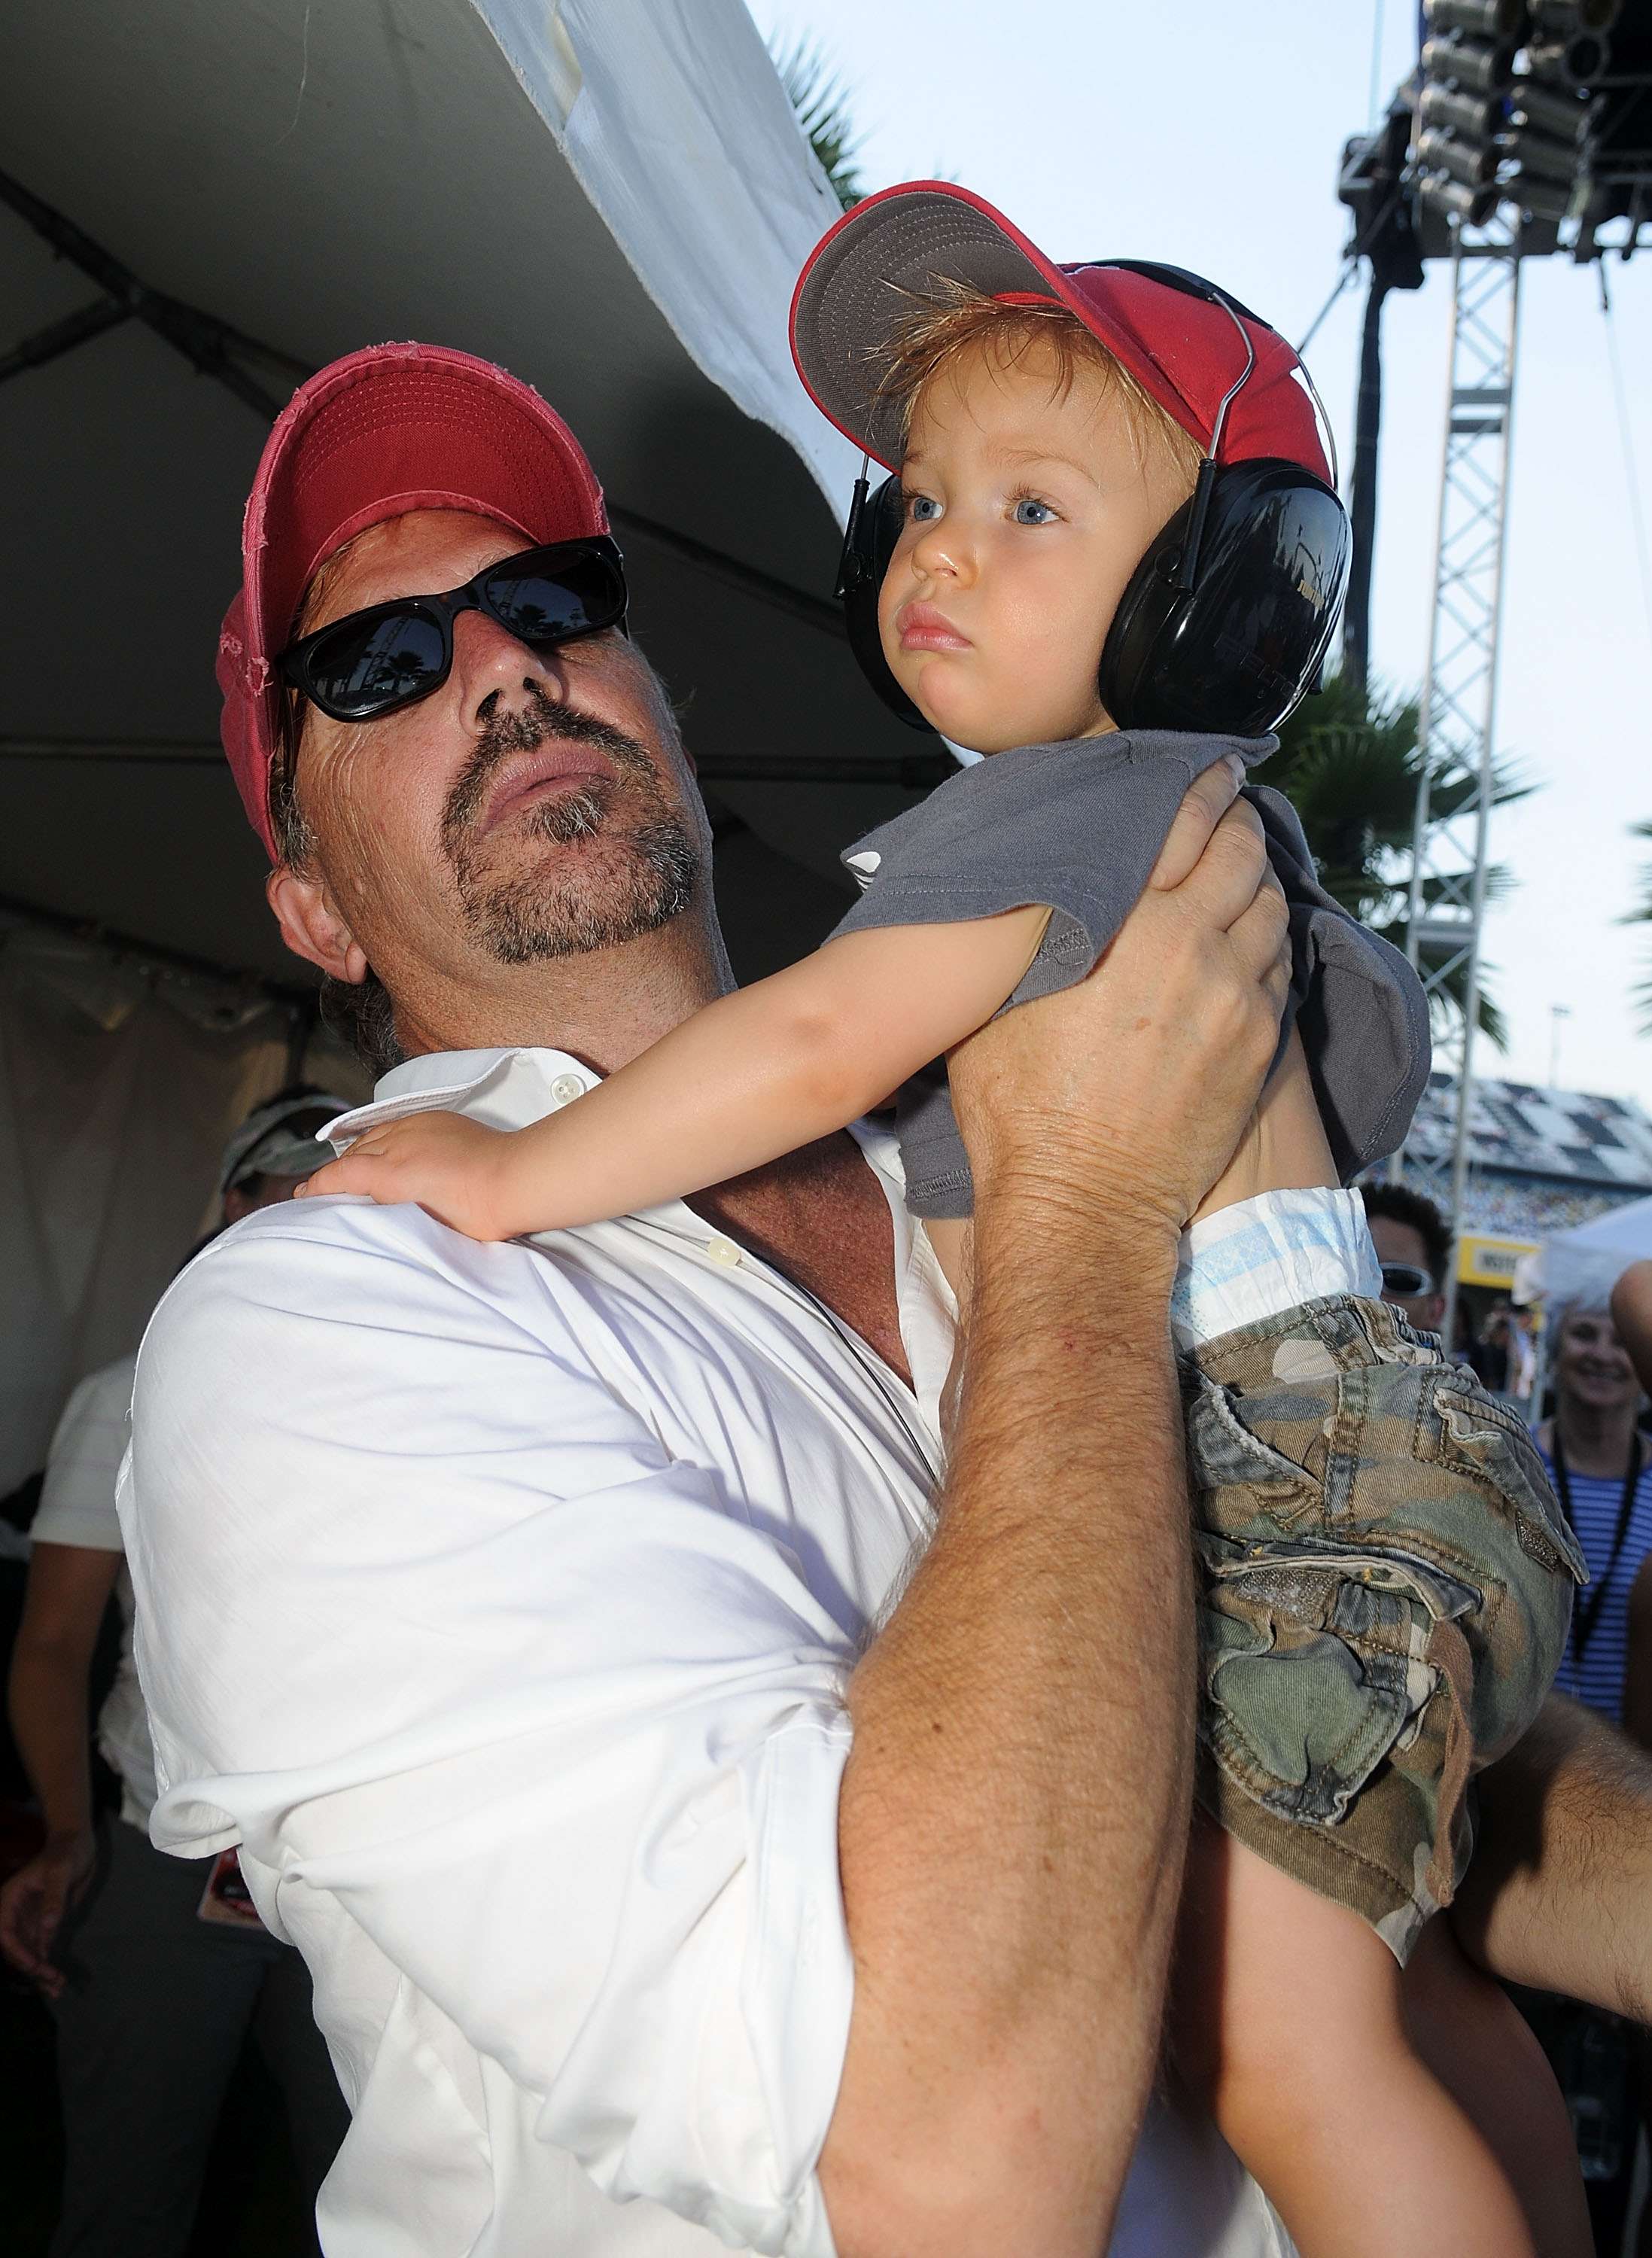 Kevin Costner and his son Cayden Costner during the Sprint Fan Zone before the NASCAR Sprint Cup Series Coke Zero 400 at Daytona International Speedway on July 5, 2008 in Daytona Beach, Florida | Source: Getty Images